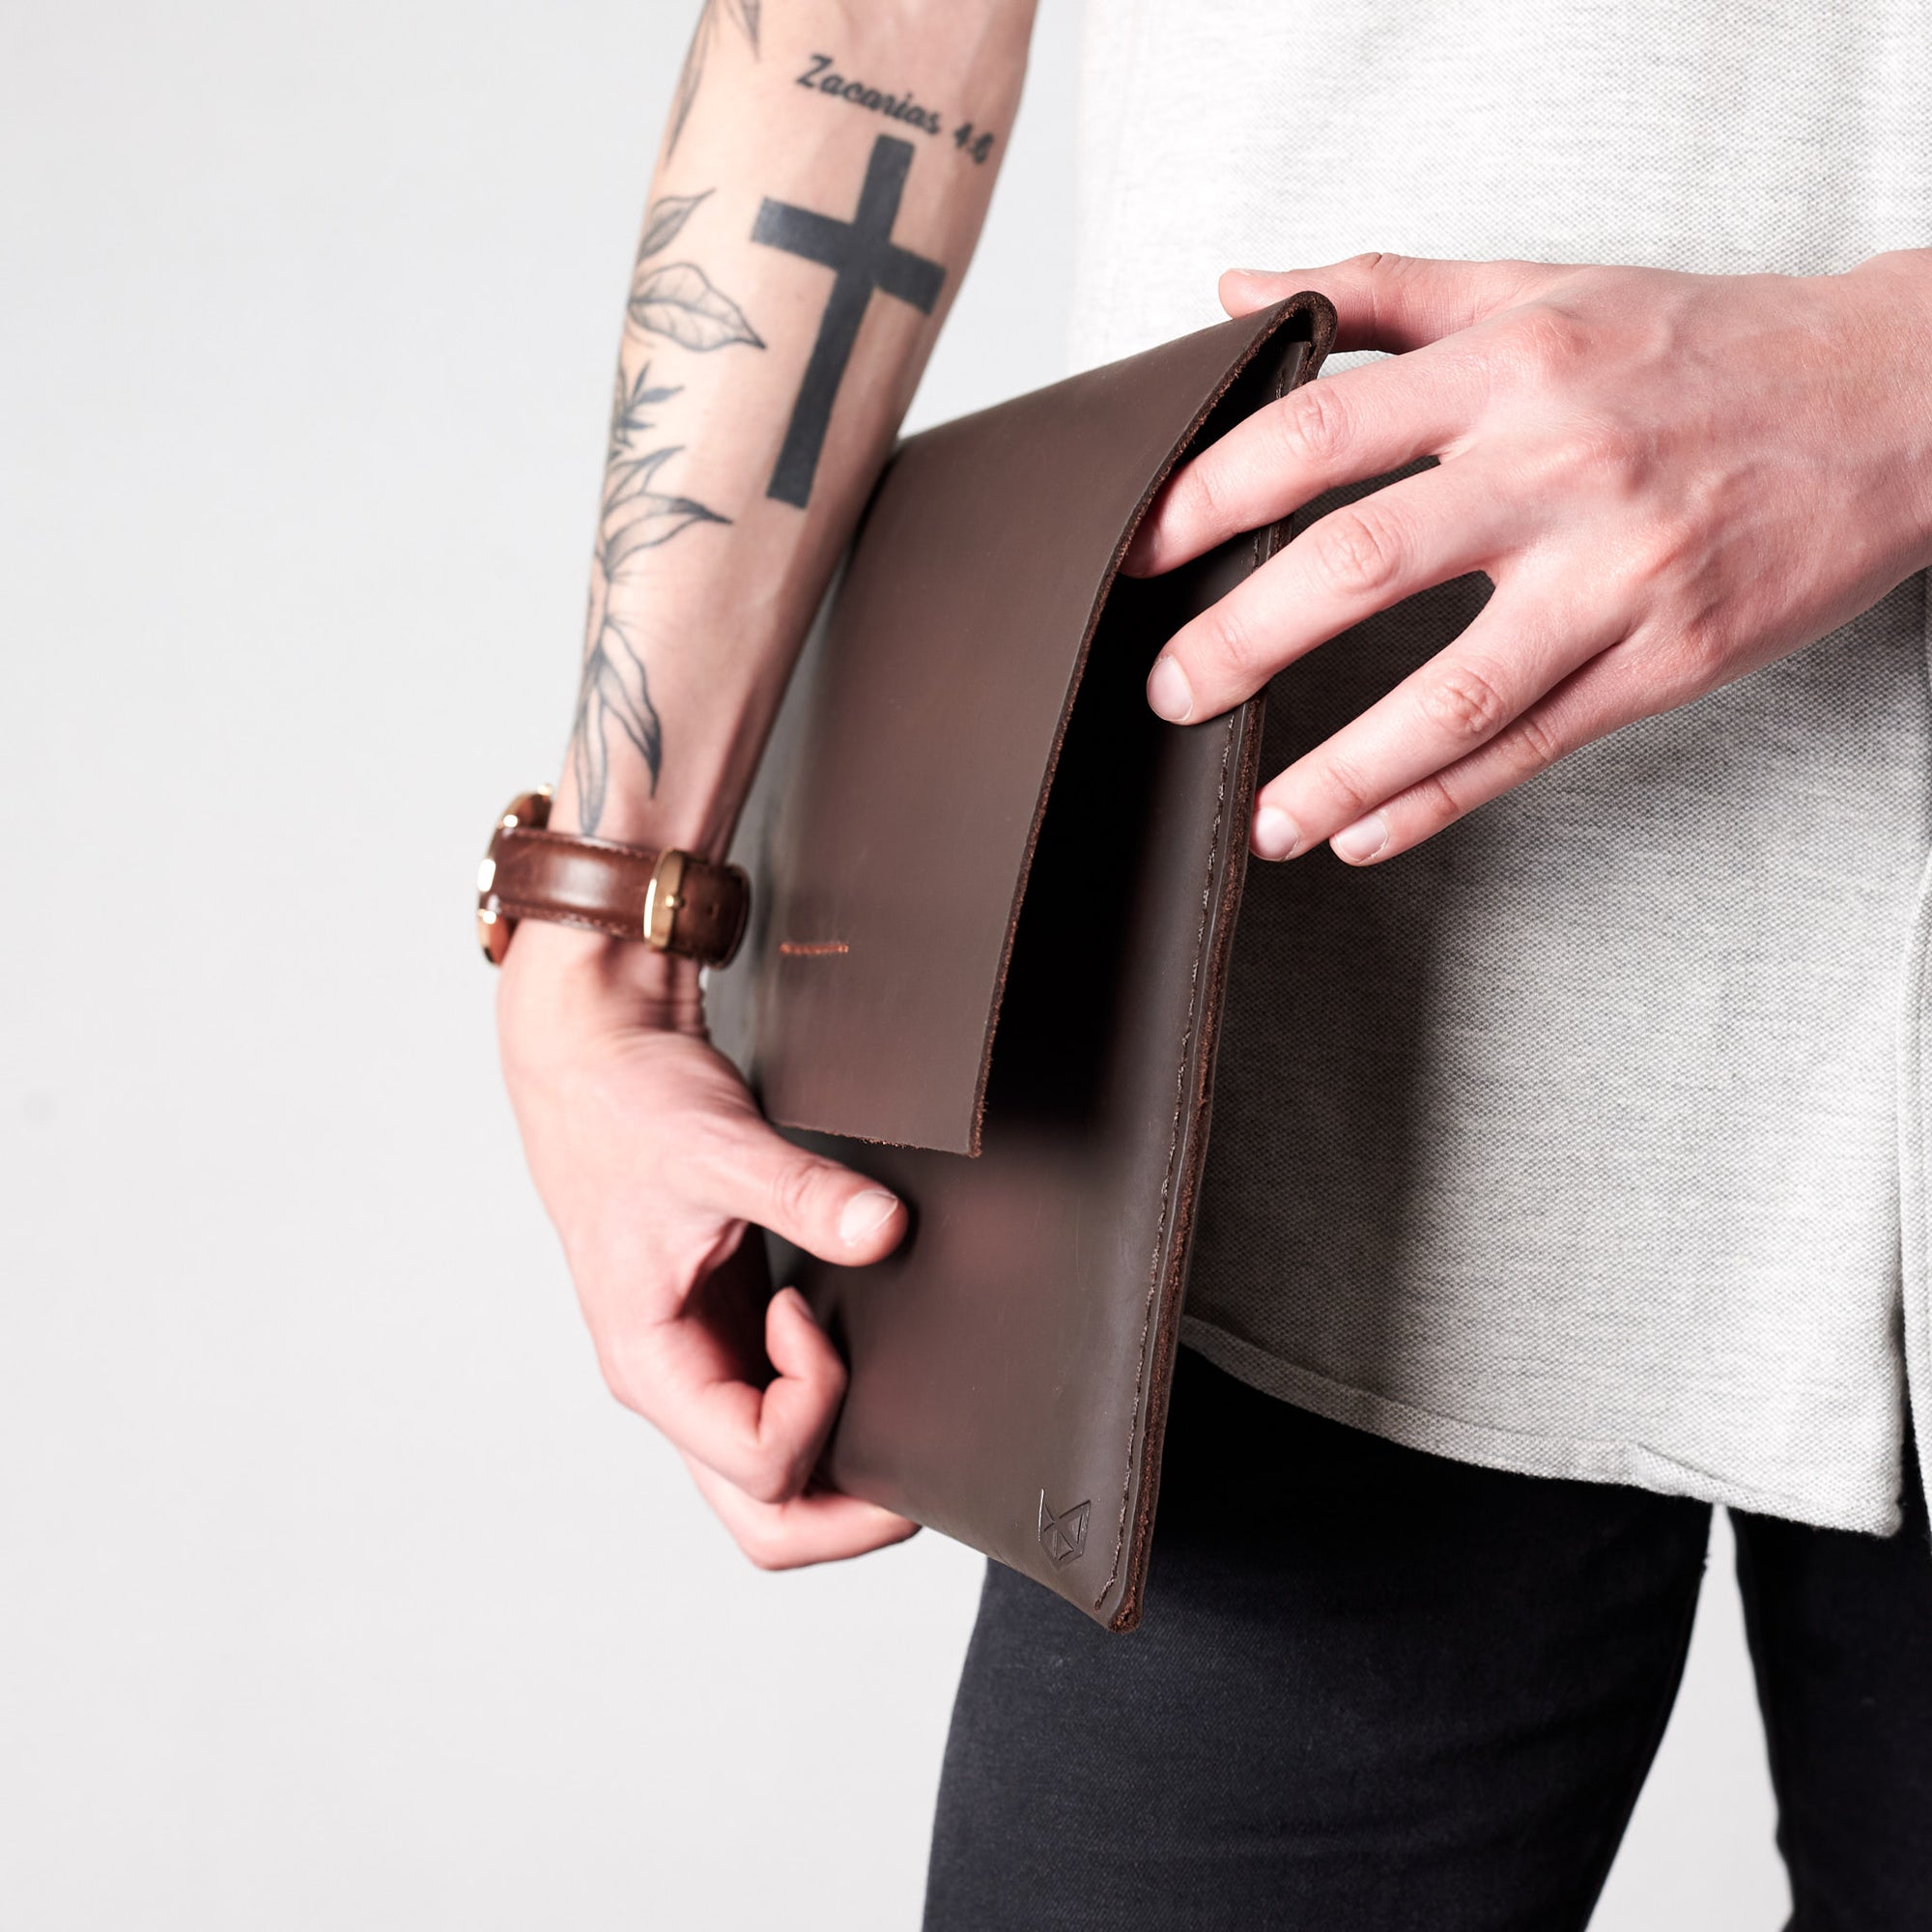 Style holding case by side. Marron draftsman 1 case by Capra Leather. ZenBook sleeve.